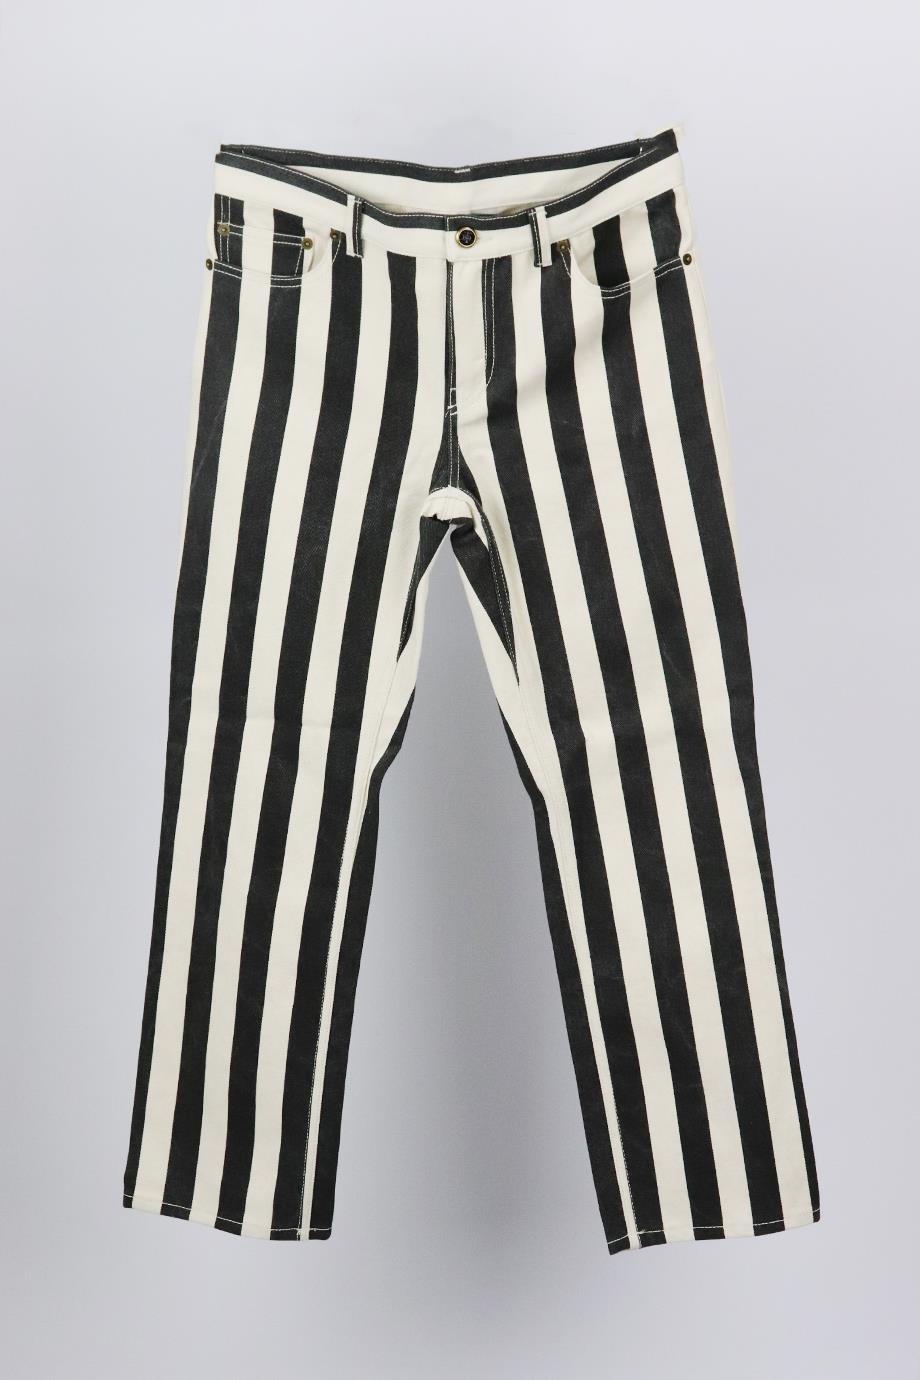 Celine striped high rise straight leg jeans. Black and white. Button and zip fastening at front. 100% Cotton. Size: FR 36 (UK 8, US 4, IT 40). Waist: 30.8 in. Hips: 35.8 in. Length: 35 in. Inseam: 26 in. Rise: 9.5 in. Very good condition - No sign